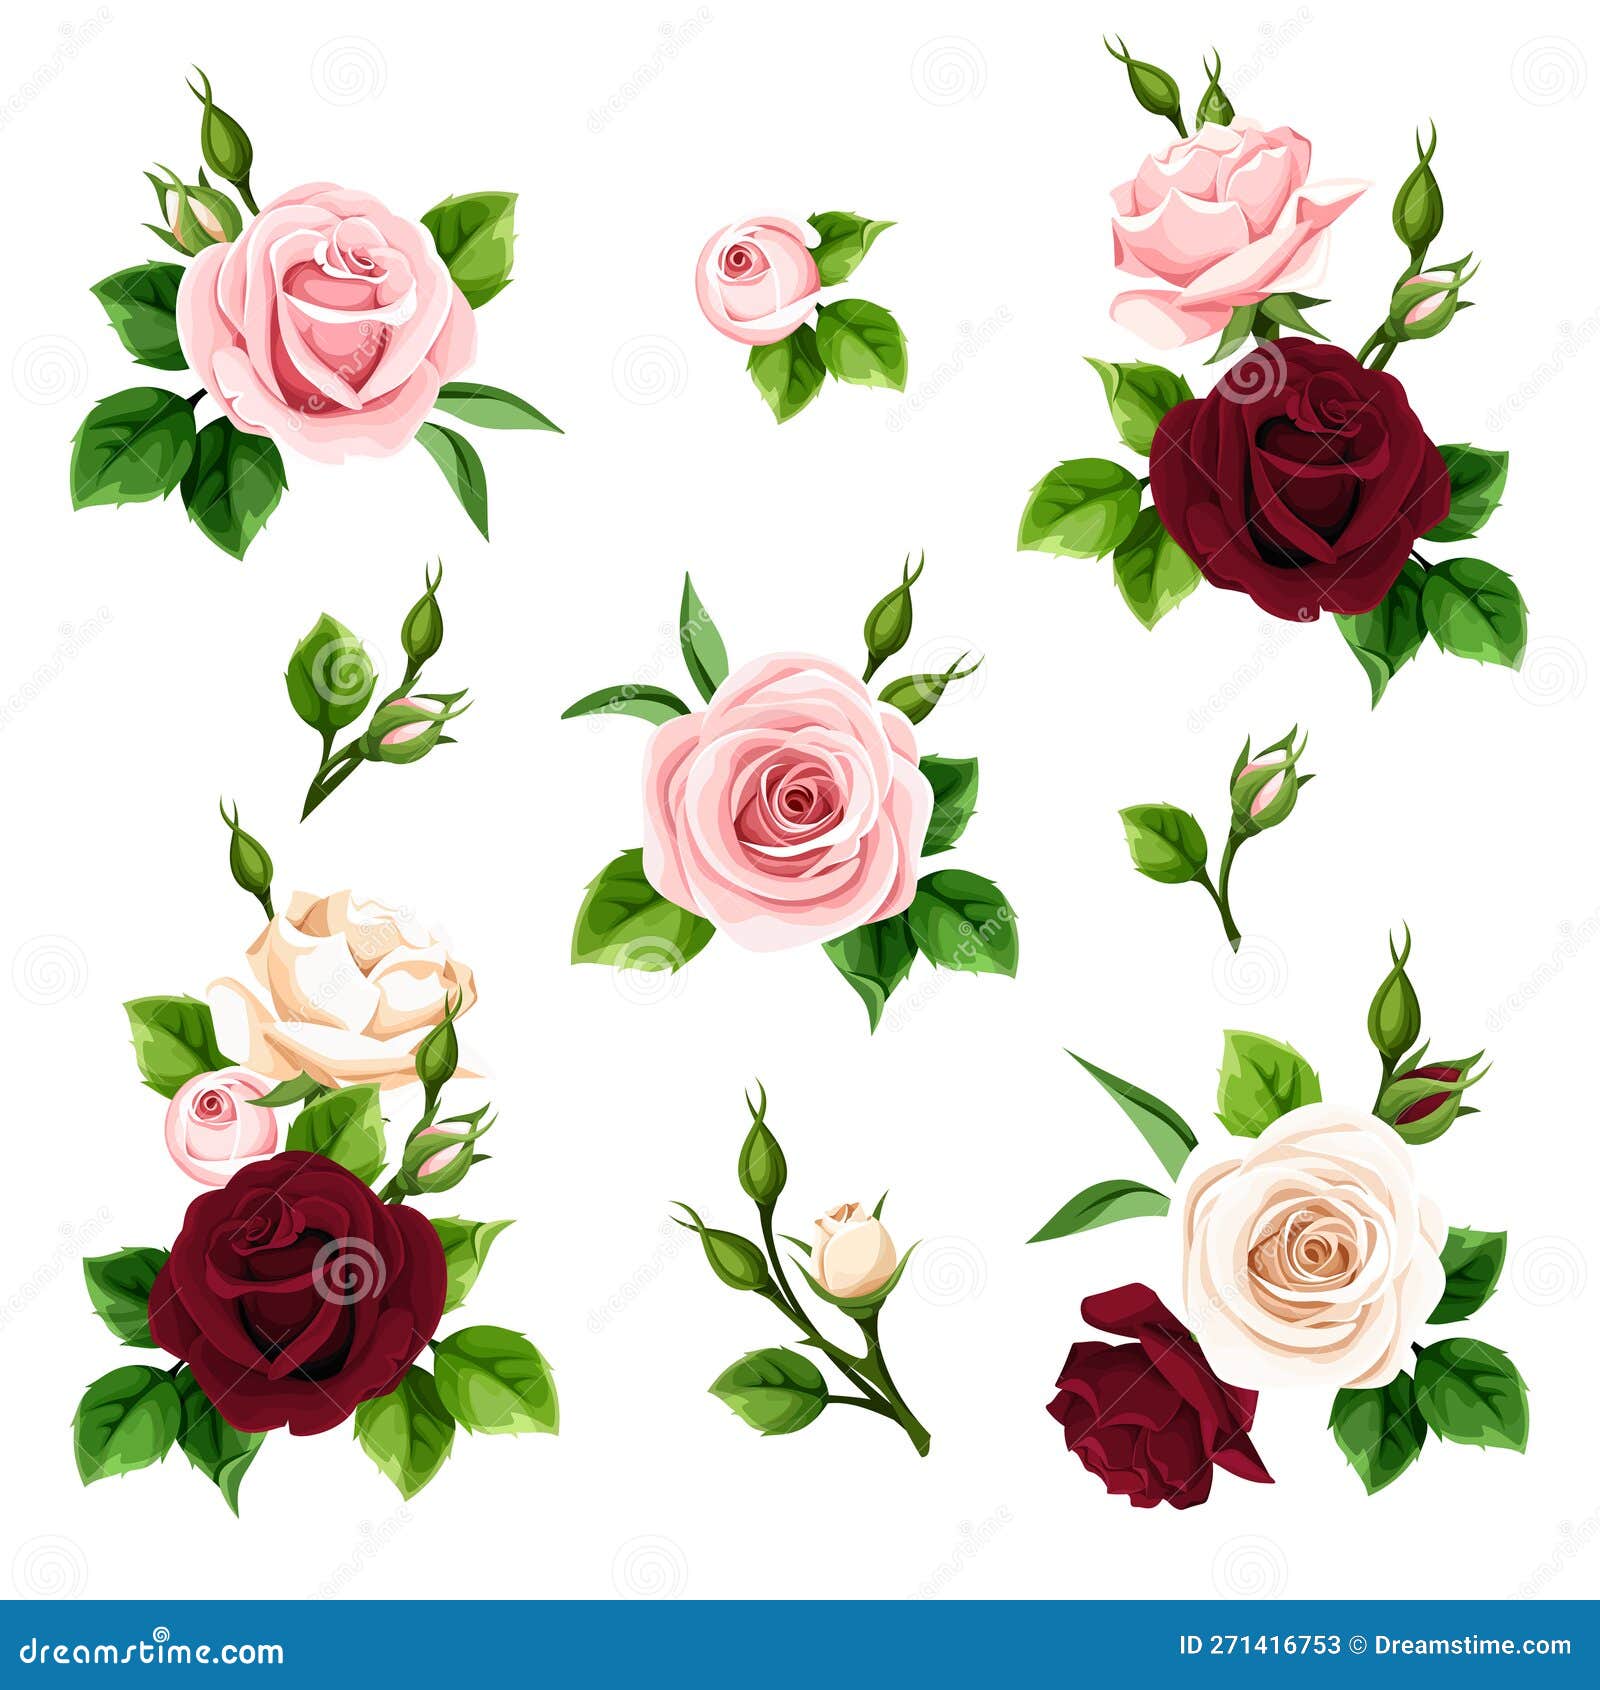 Roses. Set of Pink, Burgundy, and White Rose Flowers. Vector ...